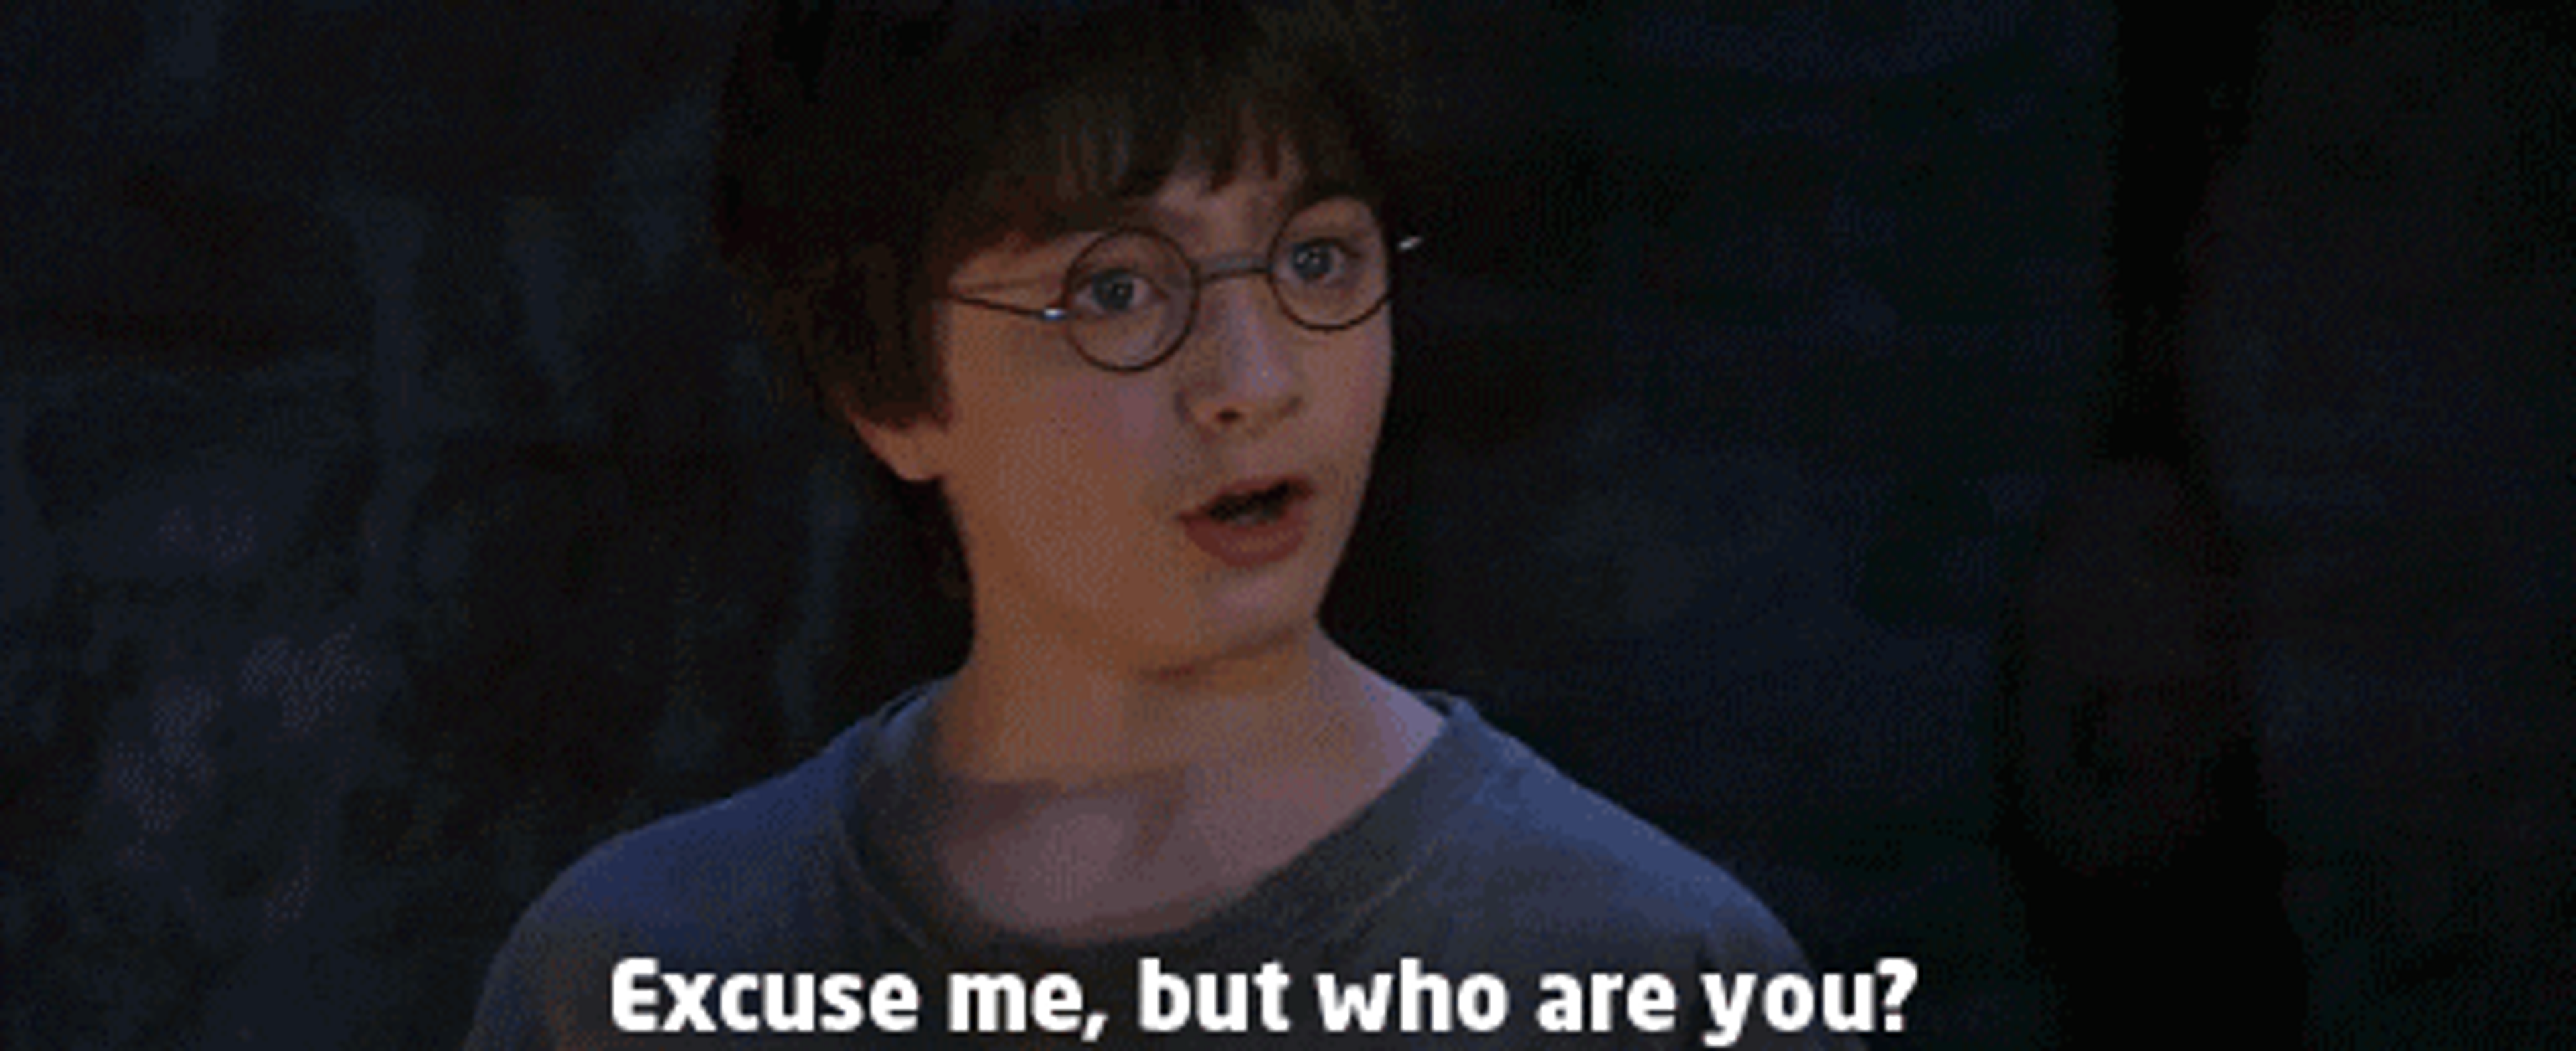 An image of Harry Potter asking "Excuse me, but who are you?"